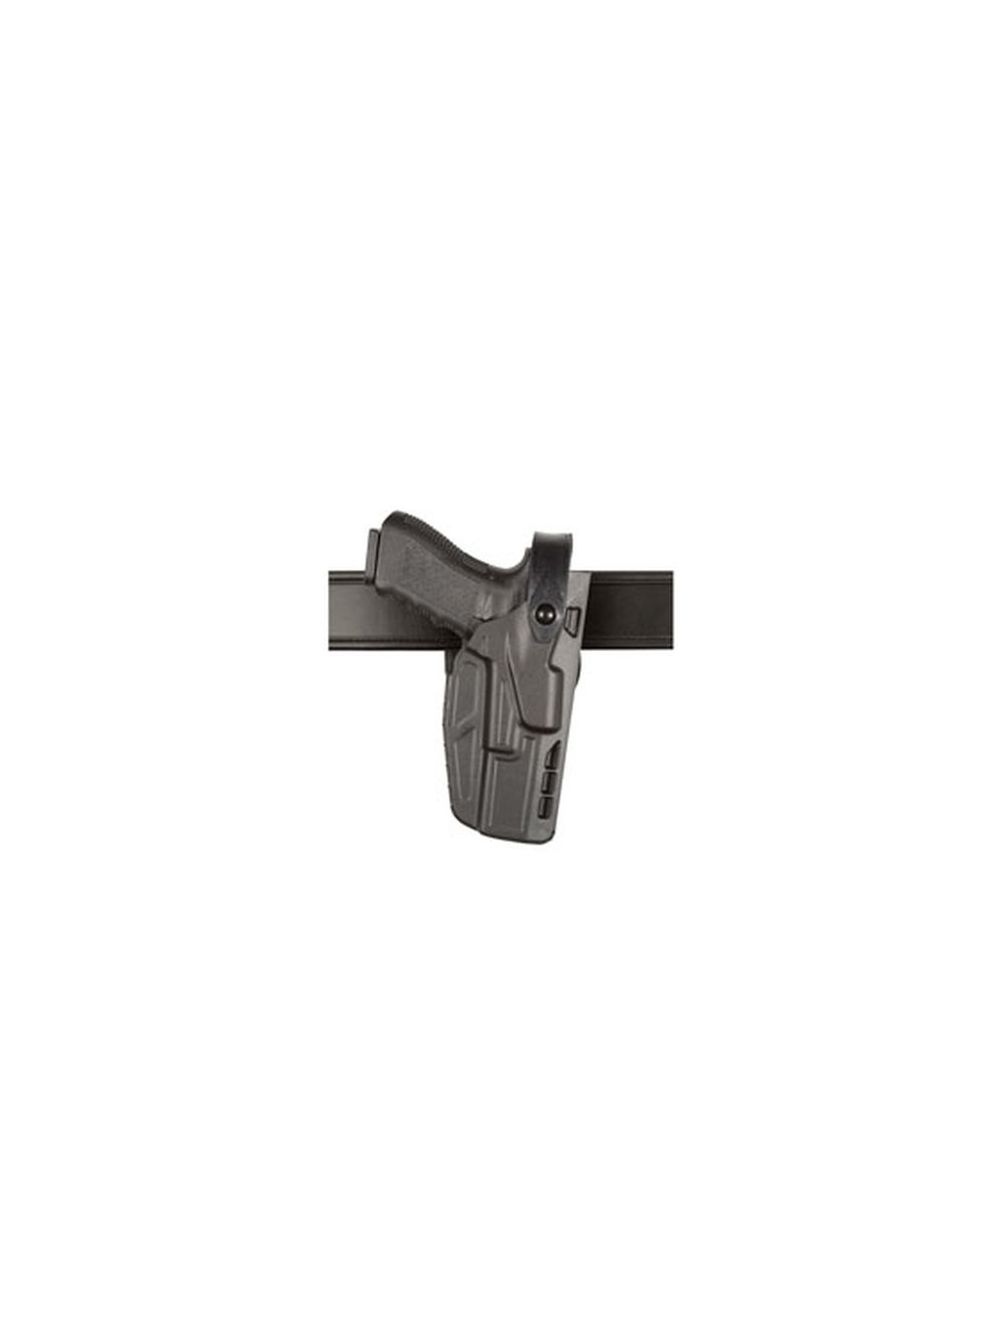 Model 7280 7TS SLS Mid-Ride, Level II Retention Duty Holster for Smith & Wesson M&P 9